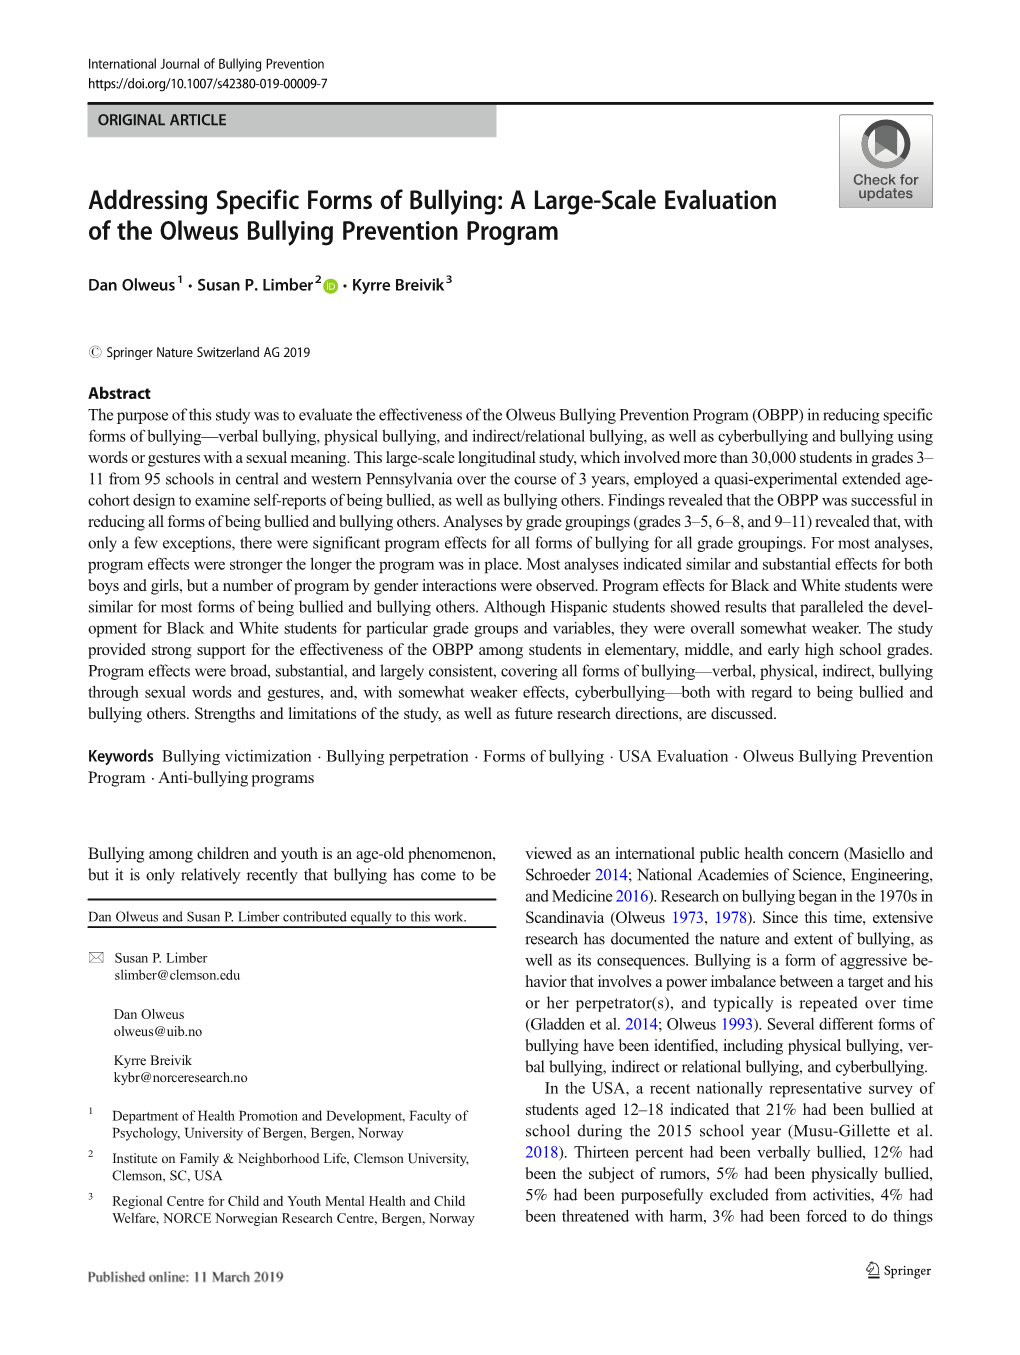 Addressing Specific Forms of Bullying: a Large-Scale Evaluation of the Olweus Bullying Prevention Program